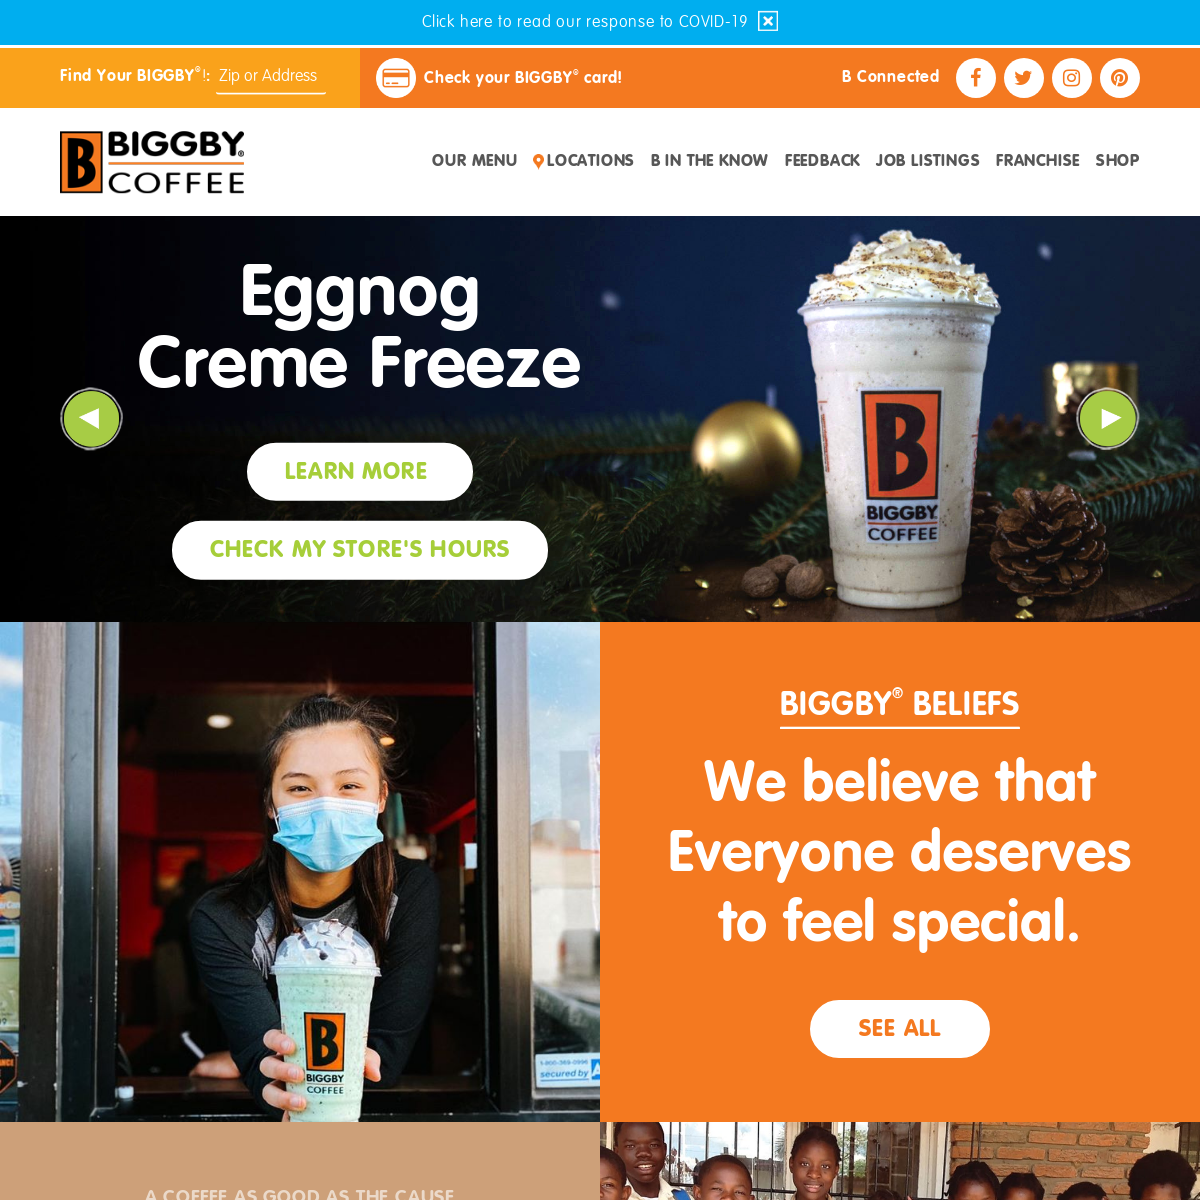 A complete backup of biggby.com